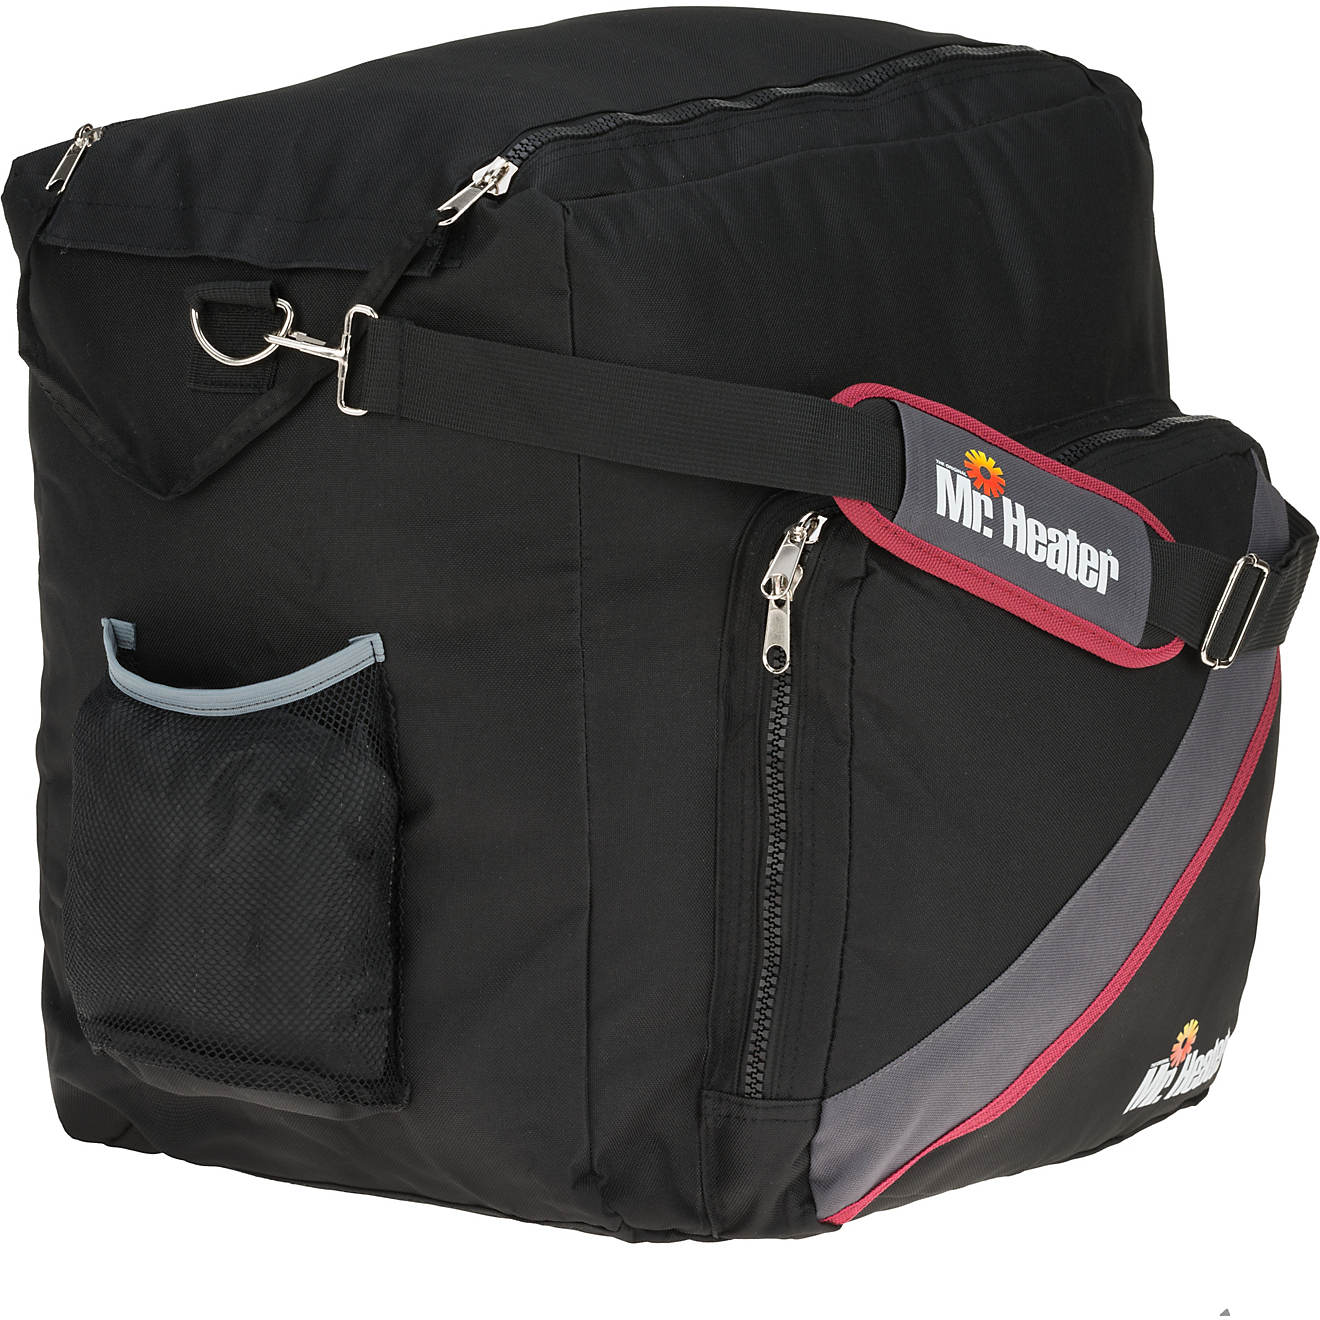 Mr. Heater 18B Big Buddy Carry Bag                                                                                               - view number 1